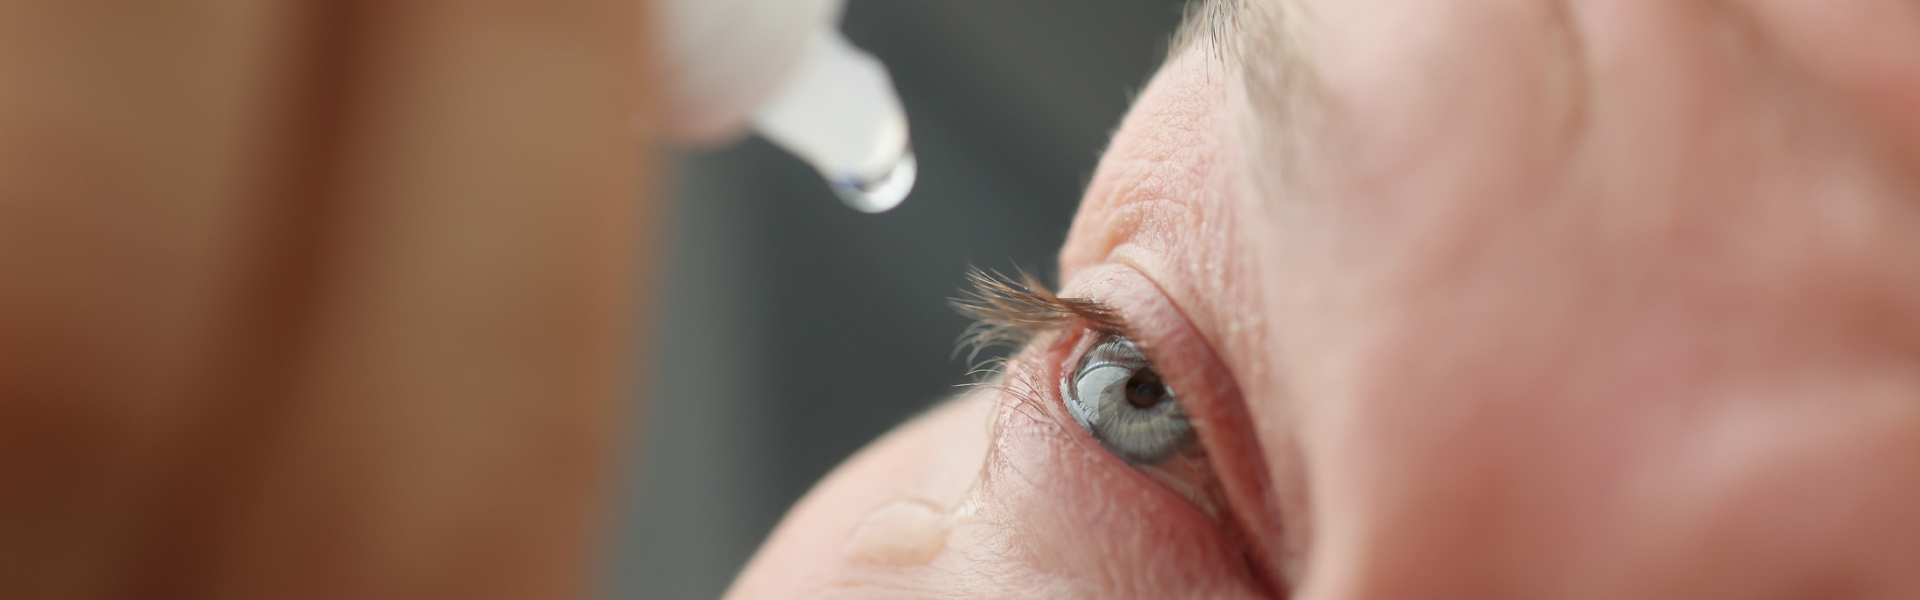 Should You Use Eye Drops with Contact Lenses?